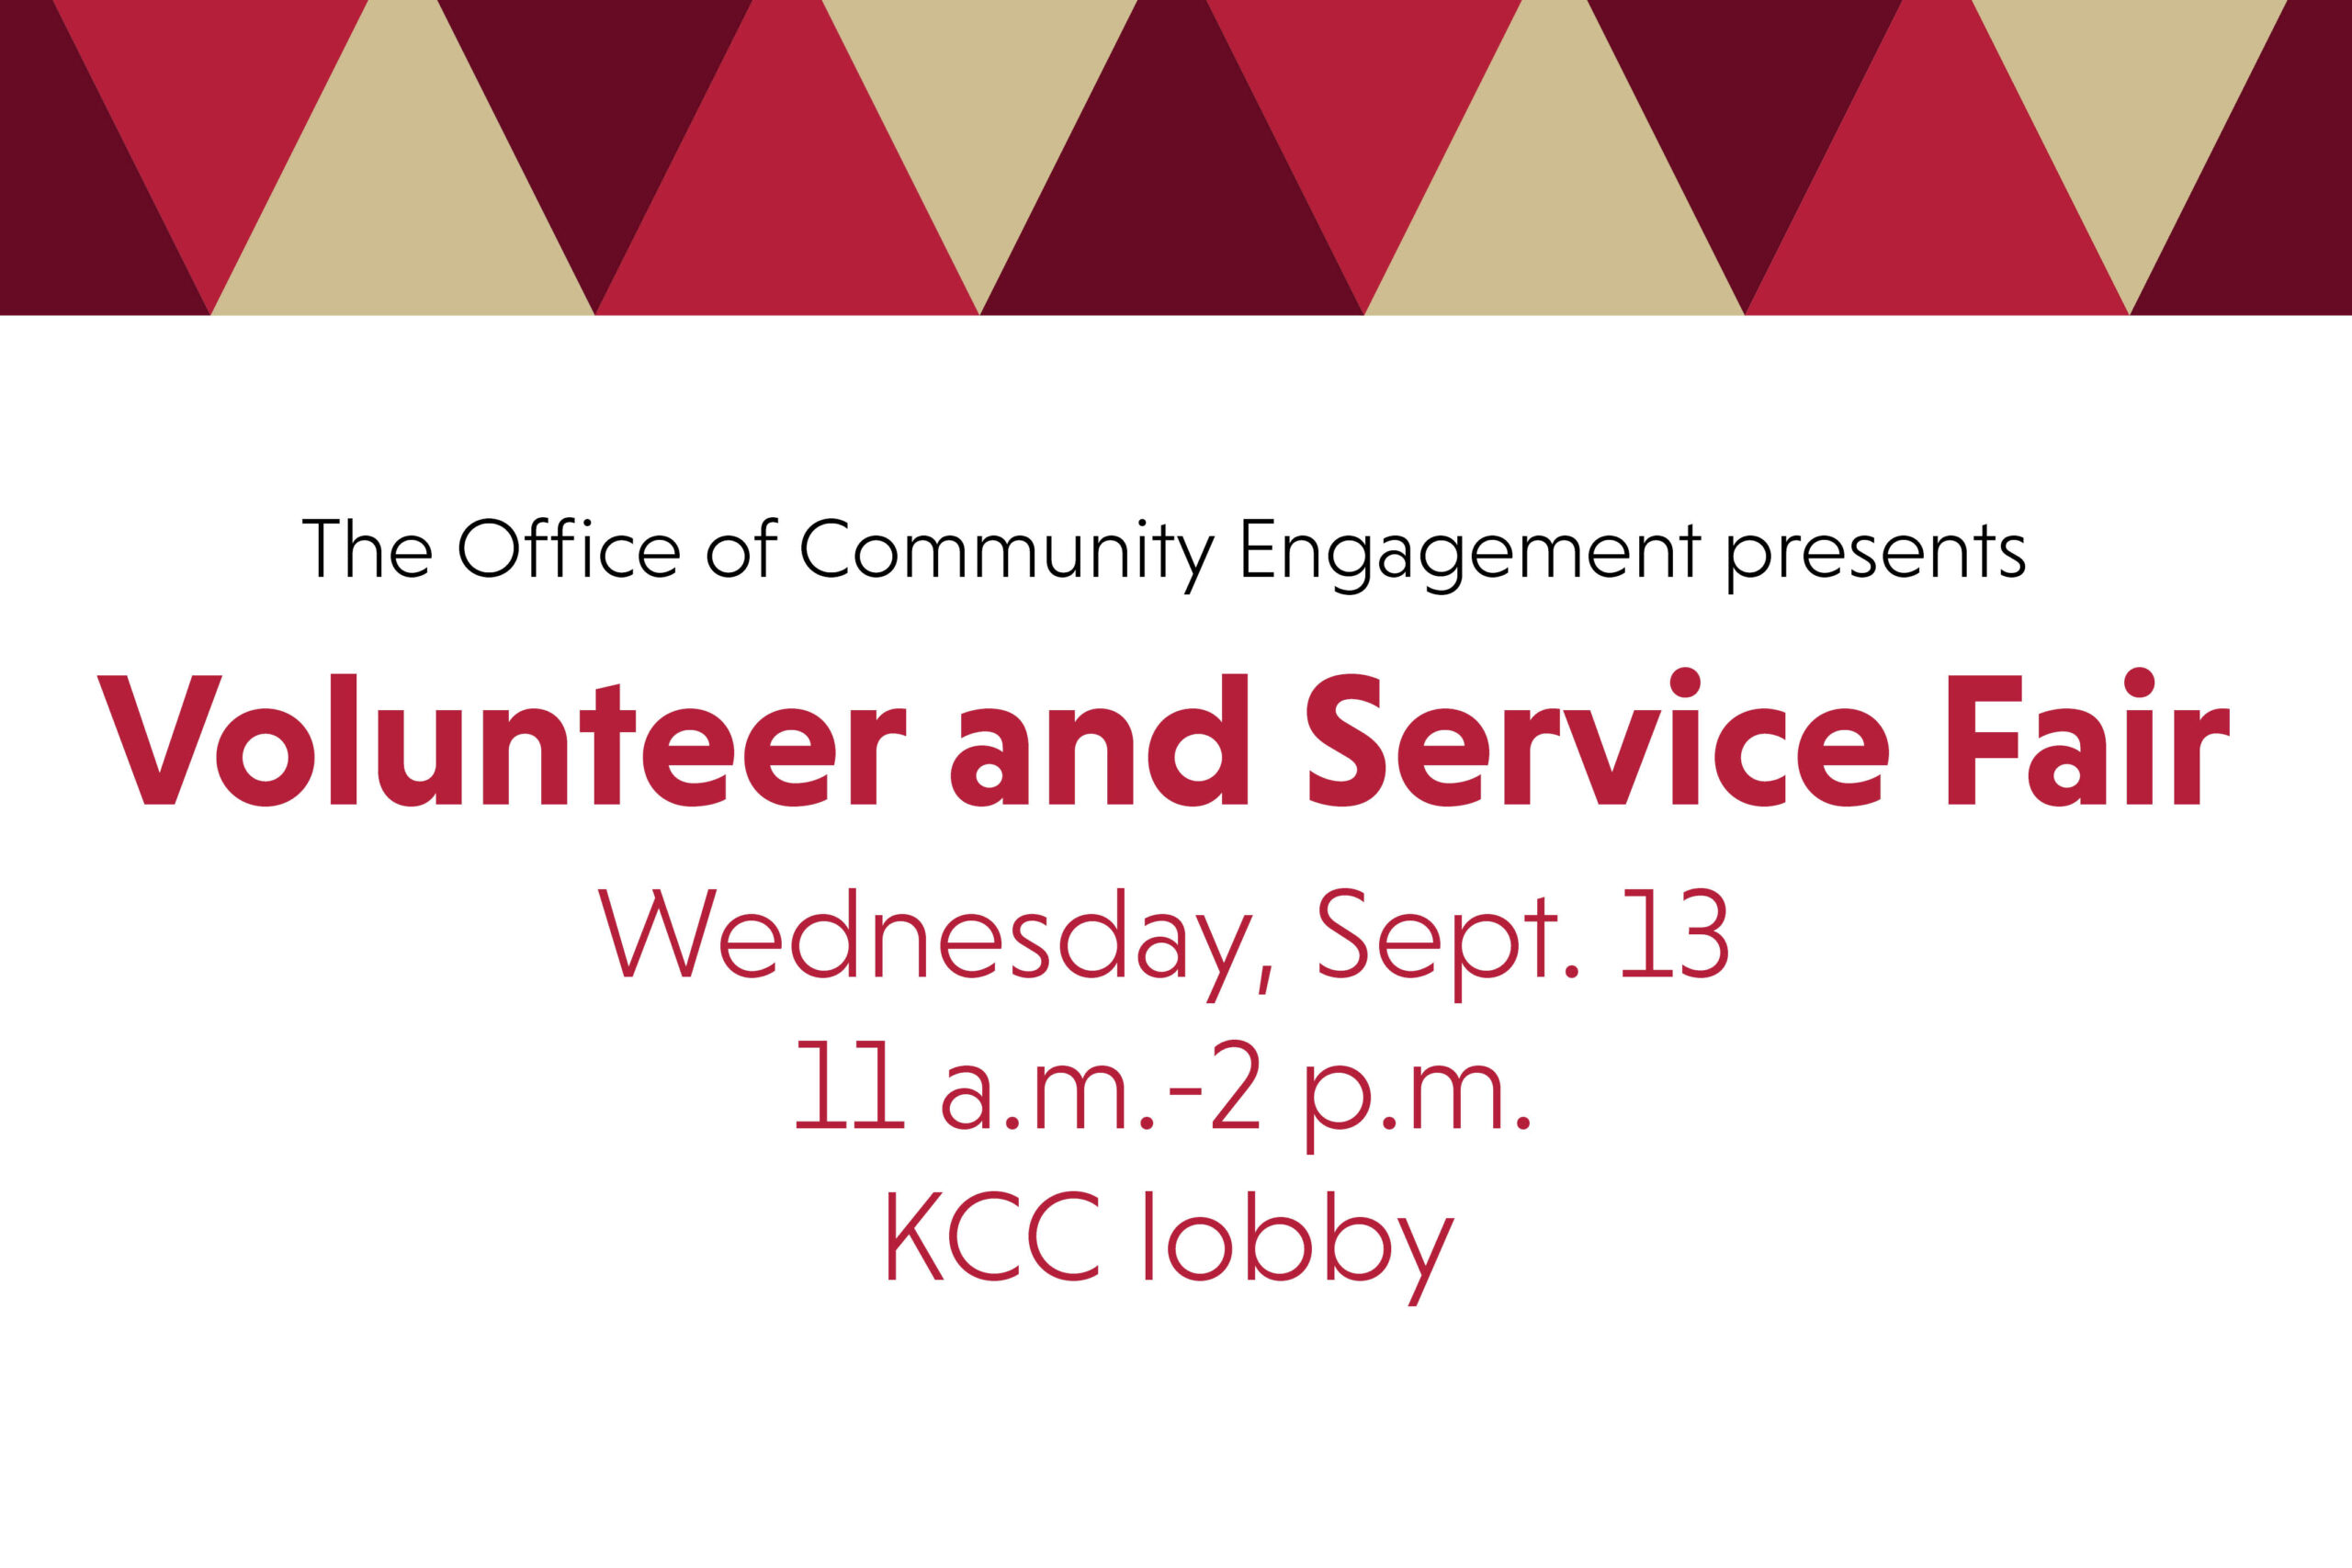 The Office of Community Engagement presents Volunteer and Service Fair. Wednesday, Sept. 13 from 11 a.m. 0 2 p.m. in the K-C-C lobby.